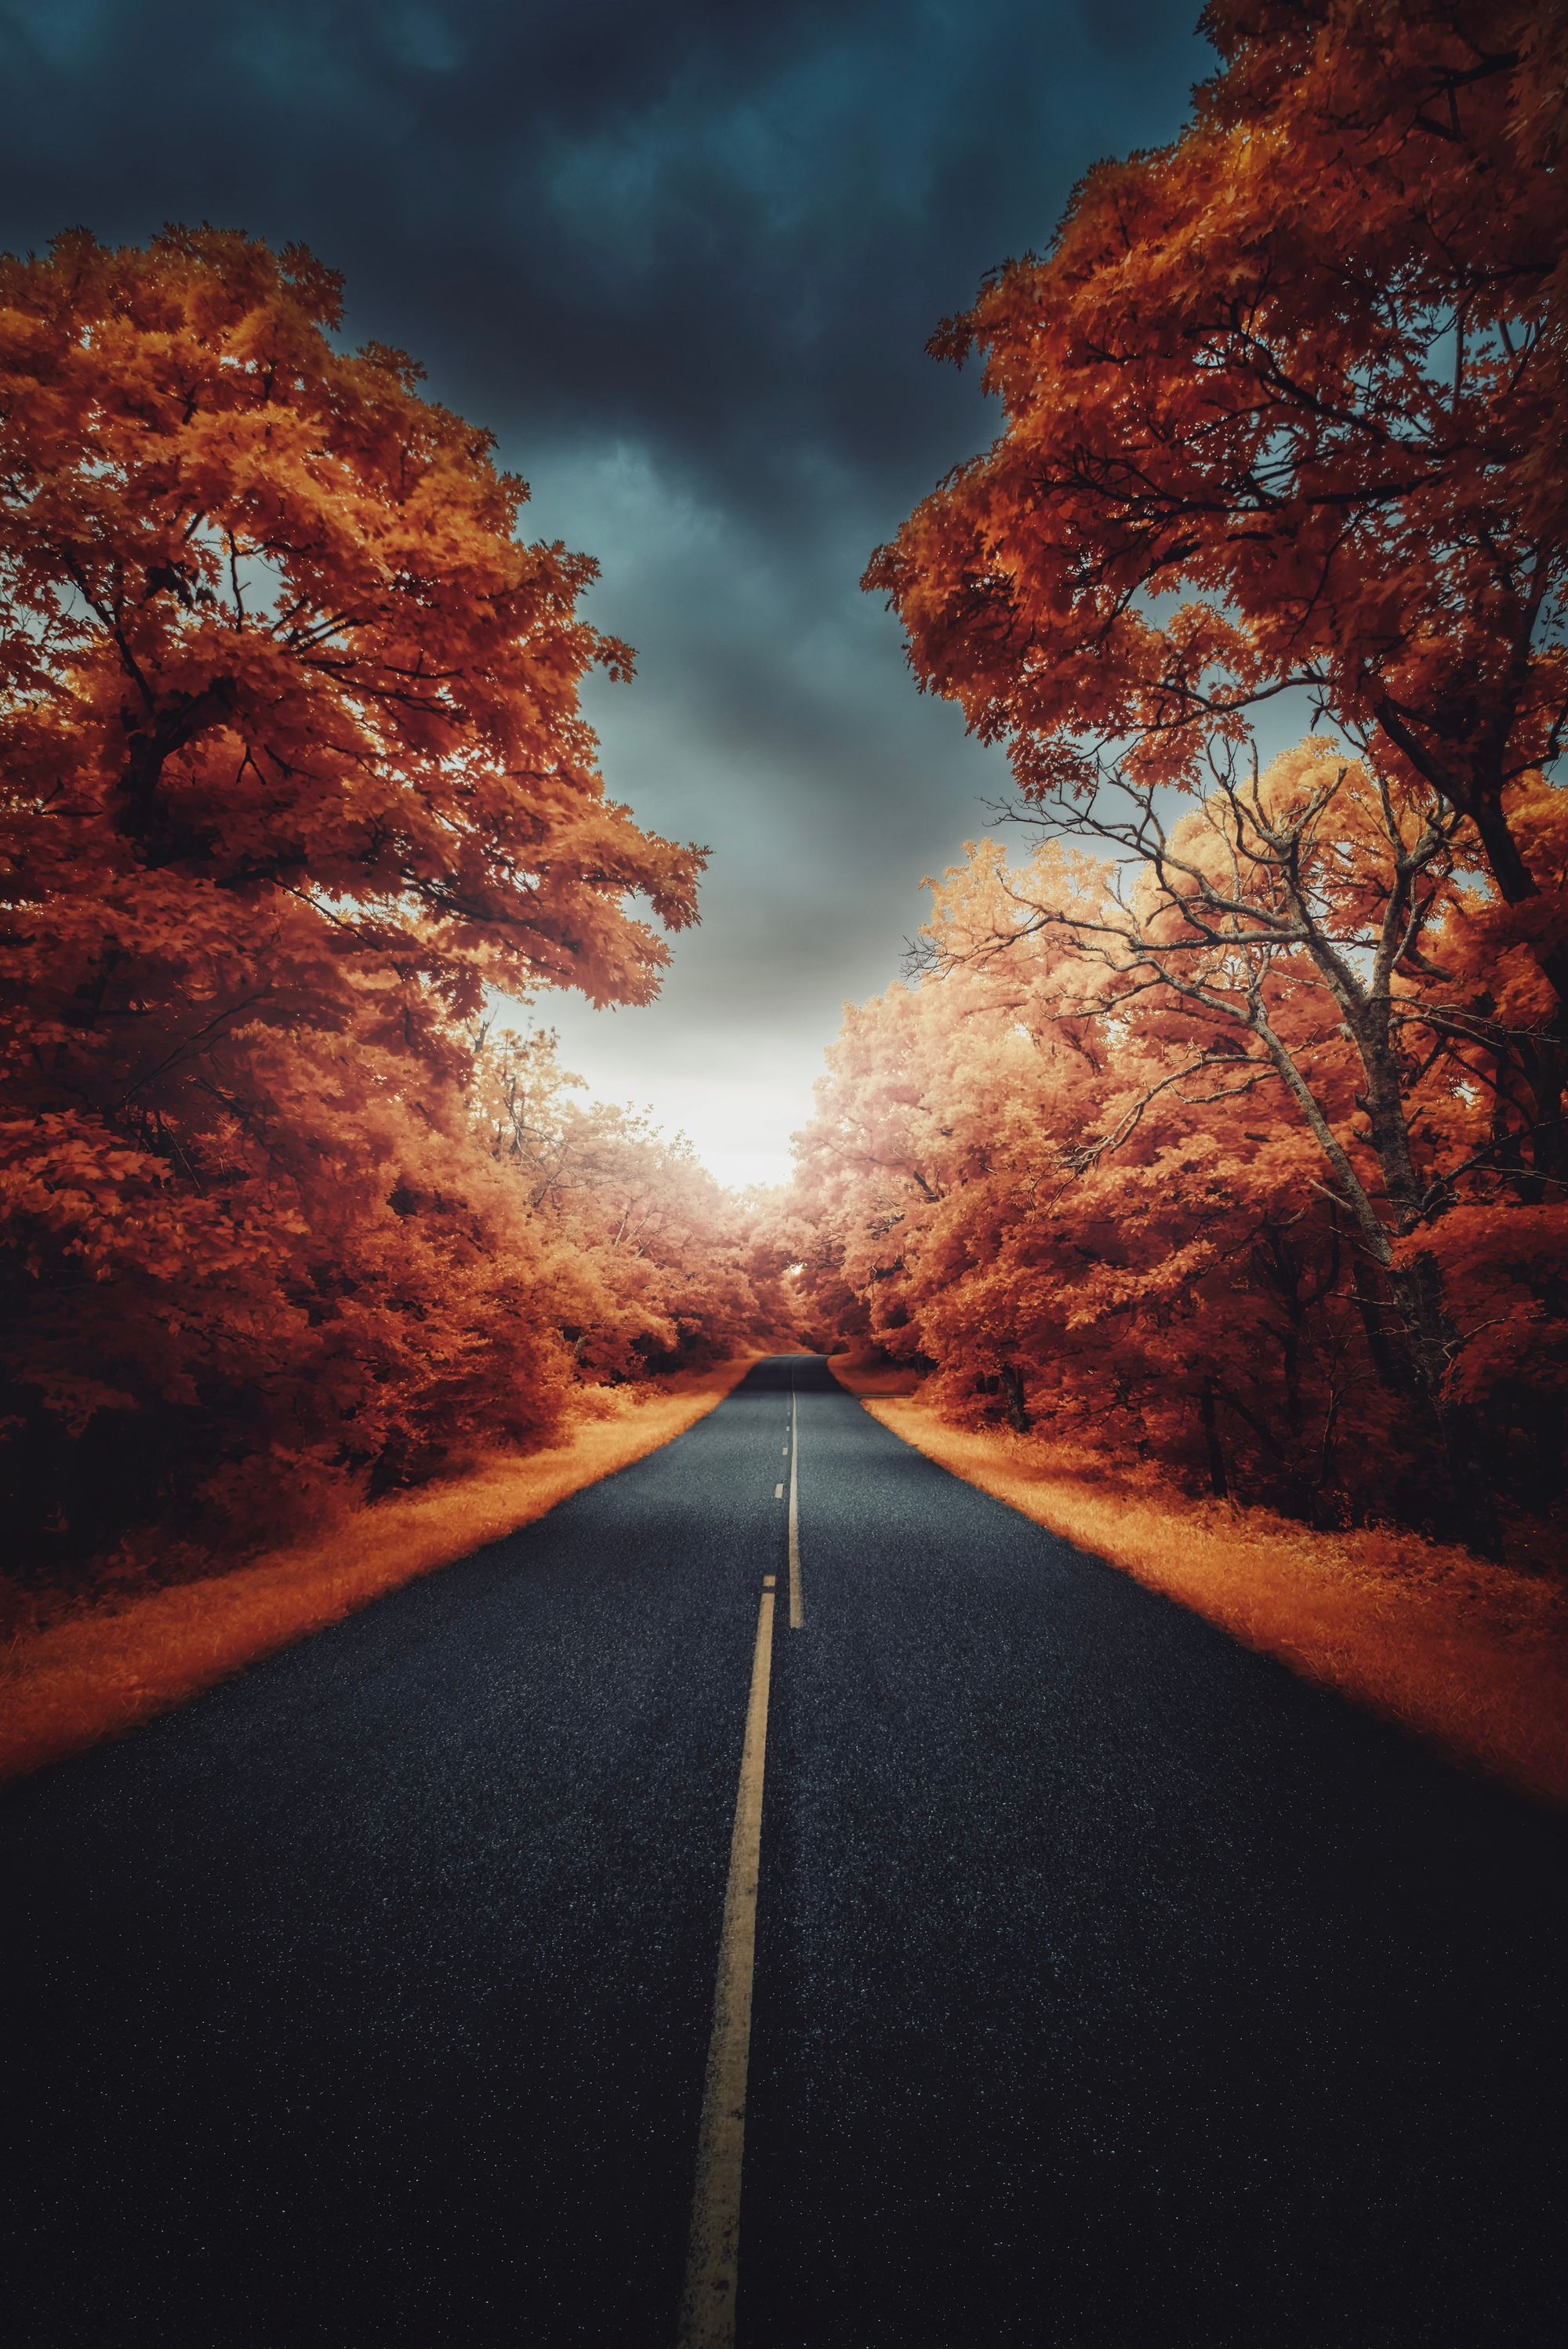 Bryan Minear's submission for "Leading Lines"